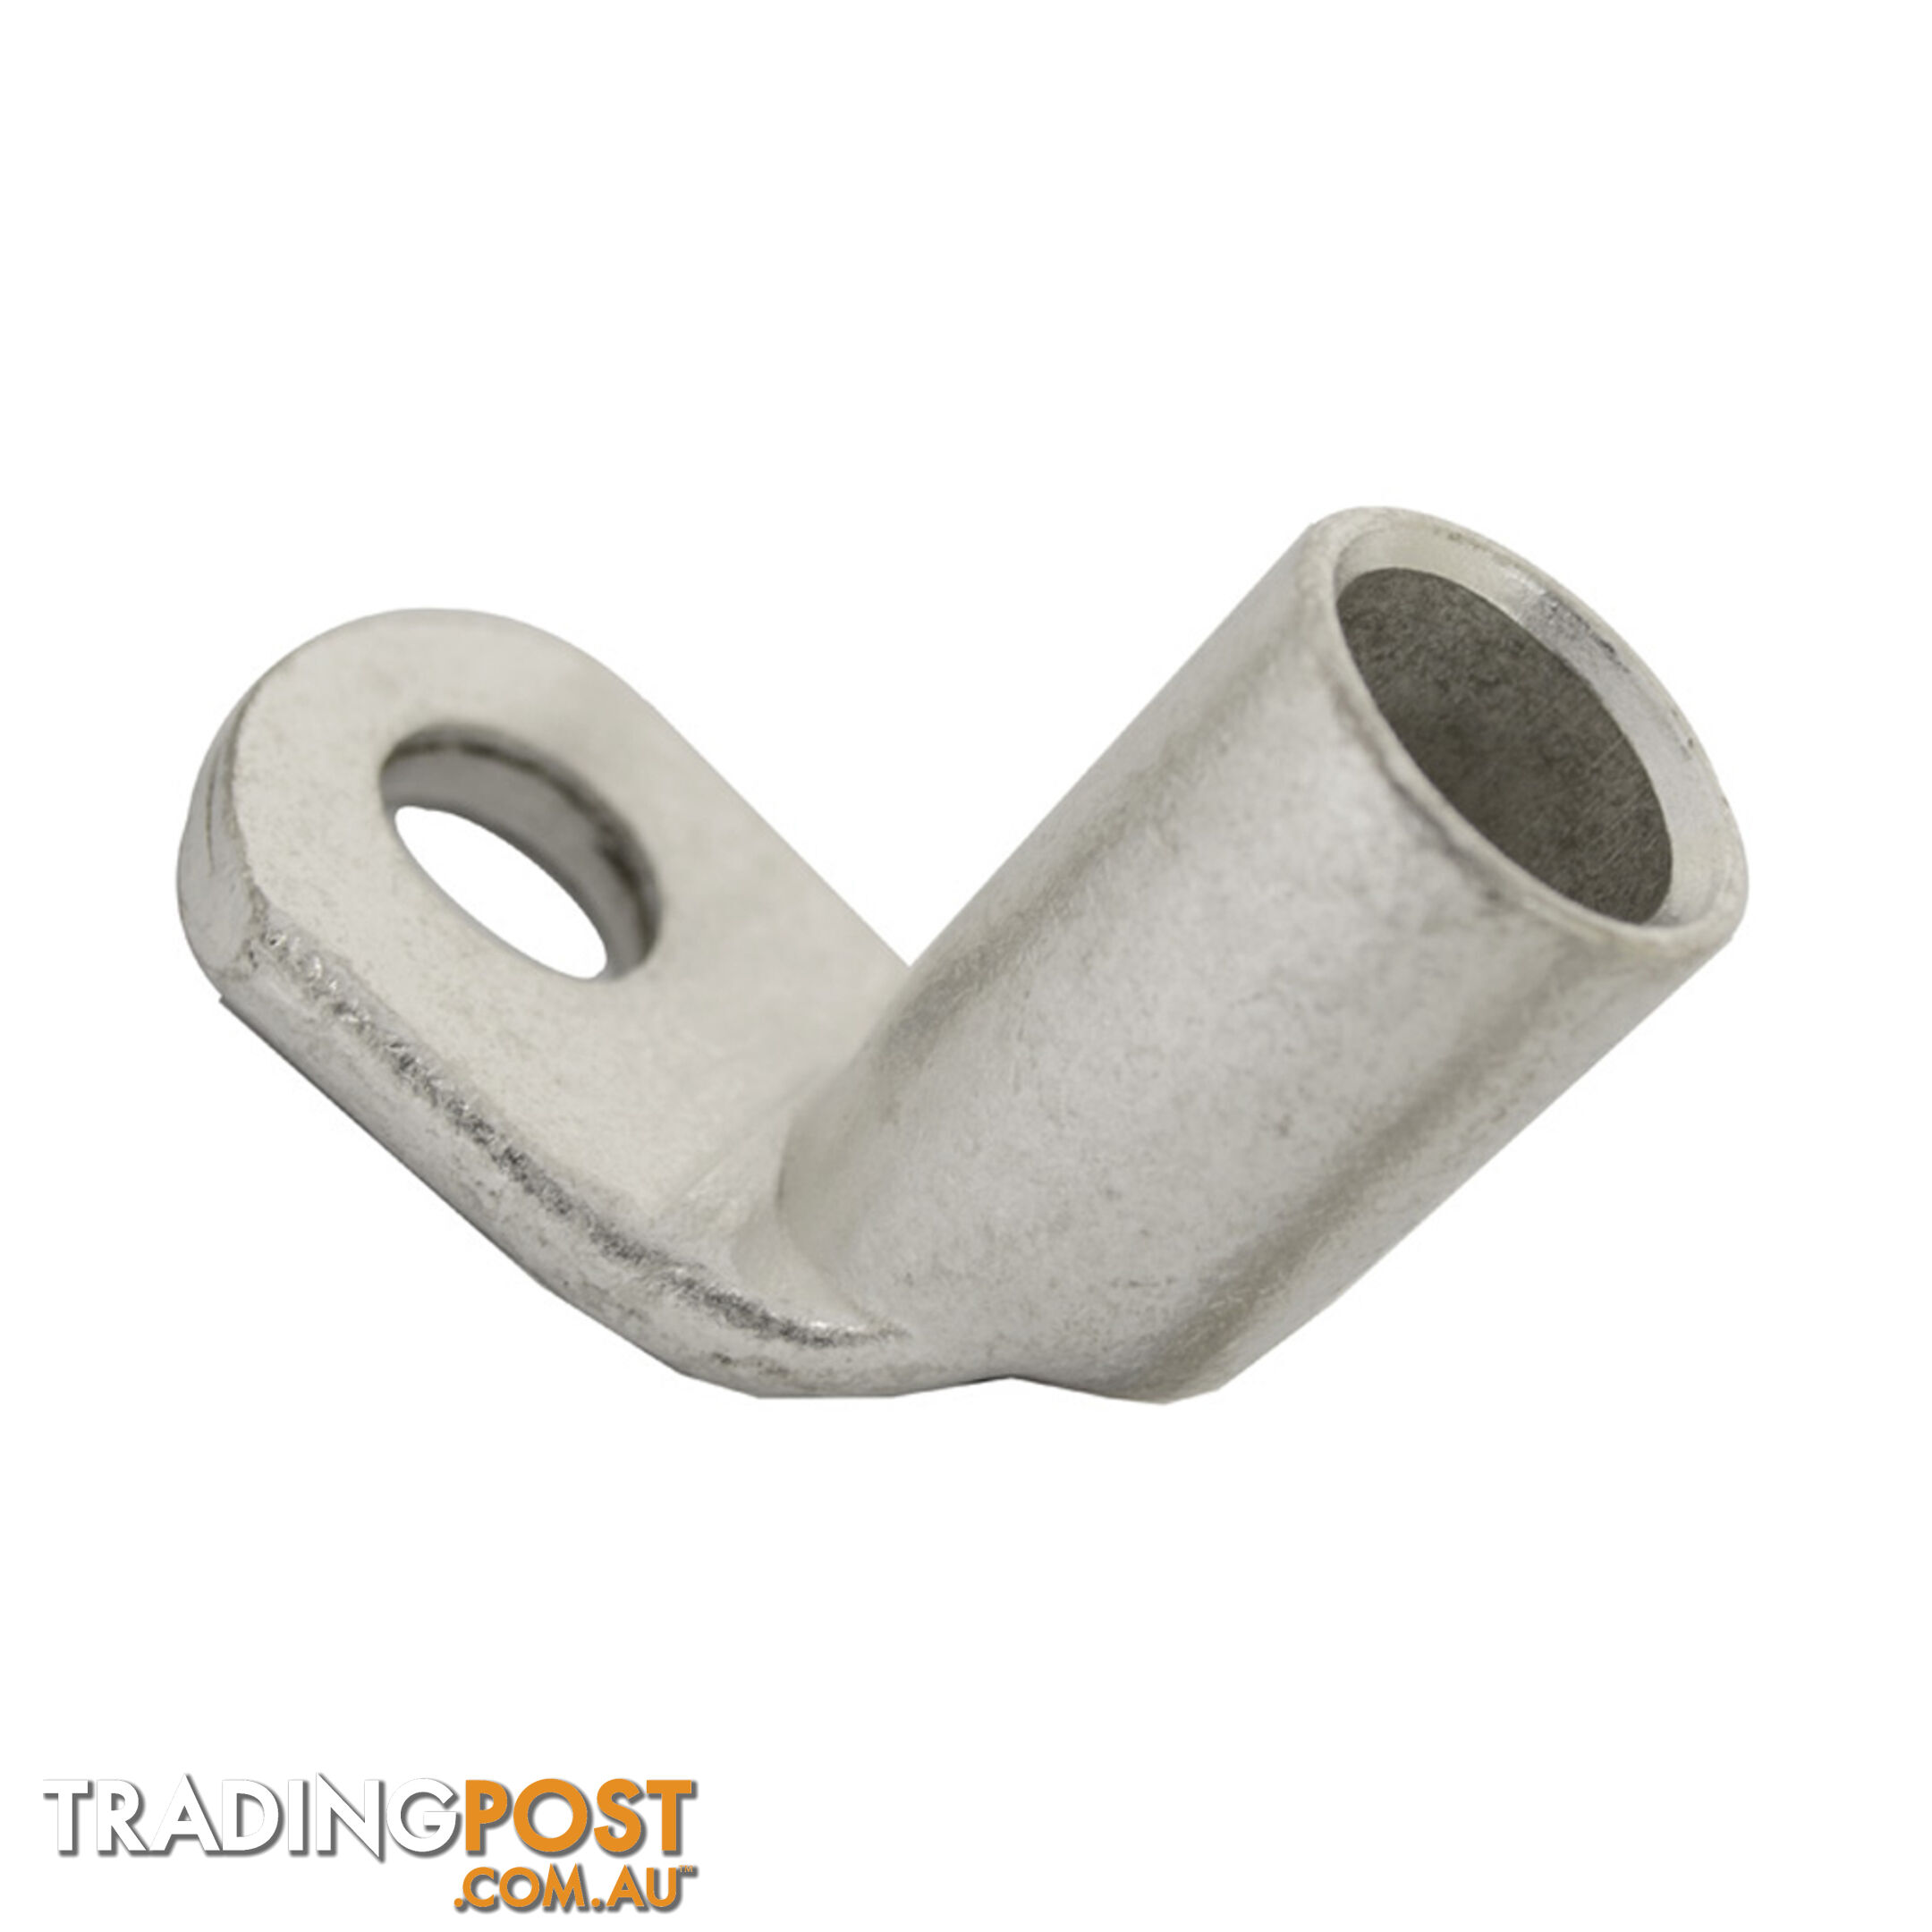 Cable Lugs Heavy Duty Tin Plated Copper Sizes 10-95mm2, Ring Dia 6-10mm SKU - LV4160, LV4107, LV4104, LV4101, LV4106, LV4103, LV4100, LV4172, LV4170, LV4167, LV4148, LV4146, LV4143, LV4141, LV4138, LV4163, LV4111, LV4116, LV4108, LV4161, LV4105, LV4102, LV4115, LV4112, LV4169, LV4110, LV4166, LV4164, LV4174, LV4162, LV4135, LV4132, LV4145, LV4142, LV4140, LV4137, LV4134, LV4131, LV4139, LV4136, LV4165, LV4133, LV4175, LV4118, LV4113